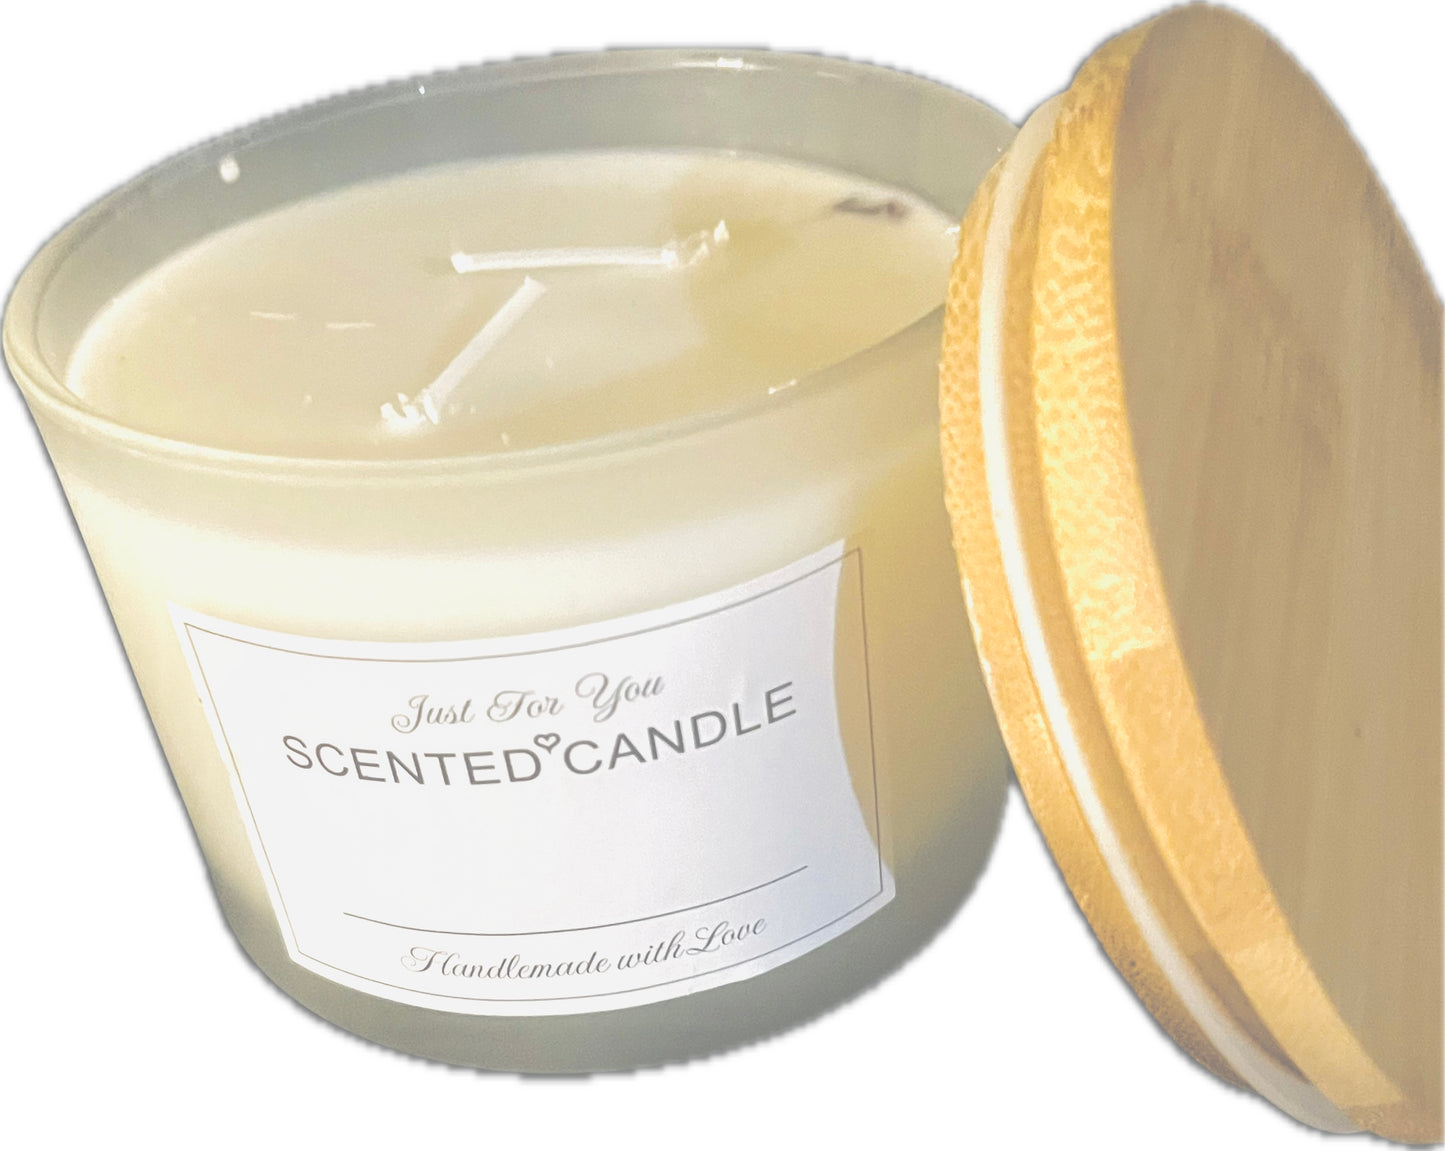 Lotus & Rose Scented Candles